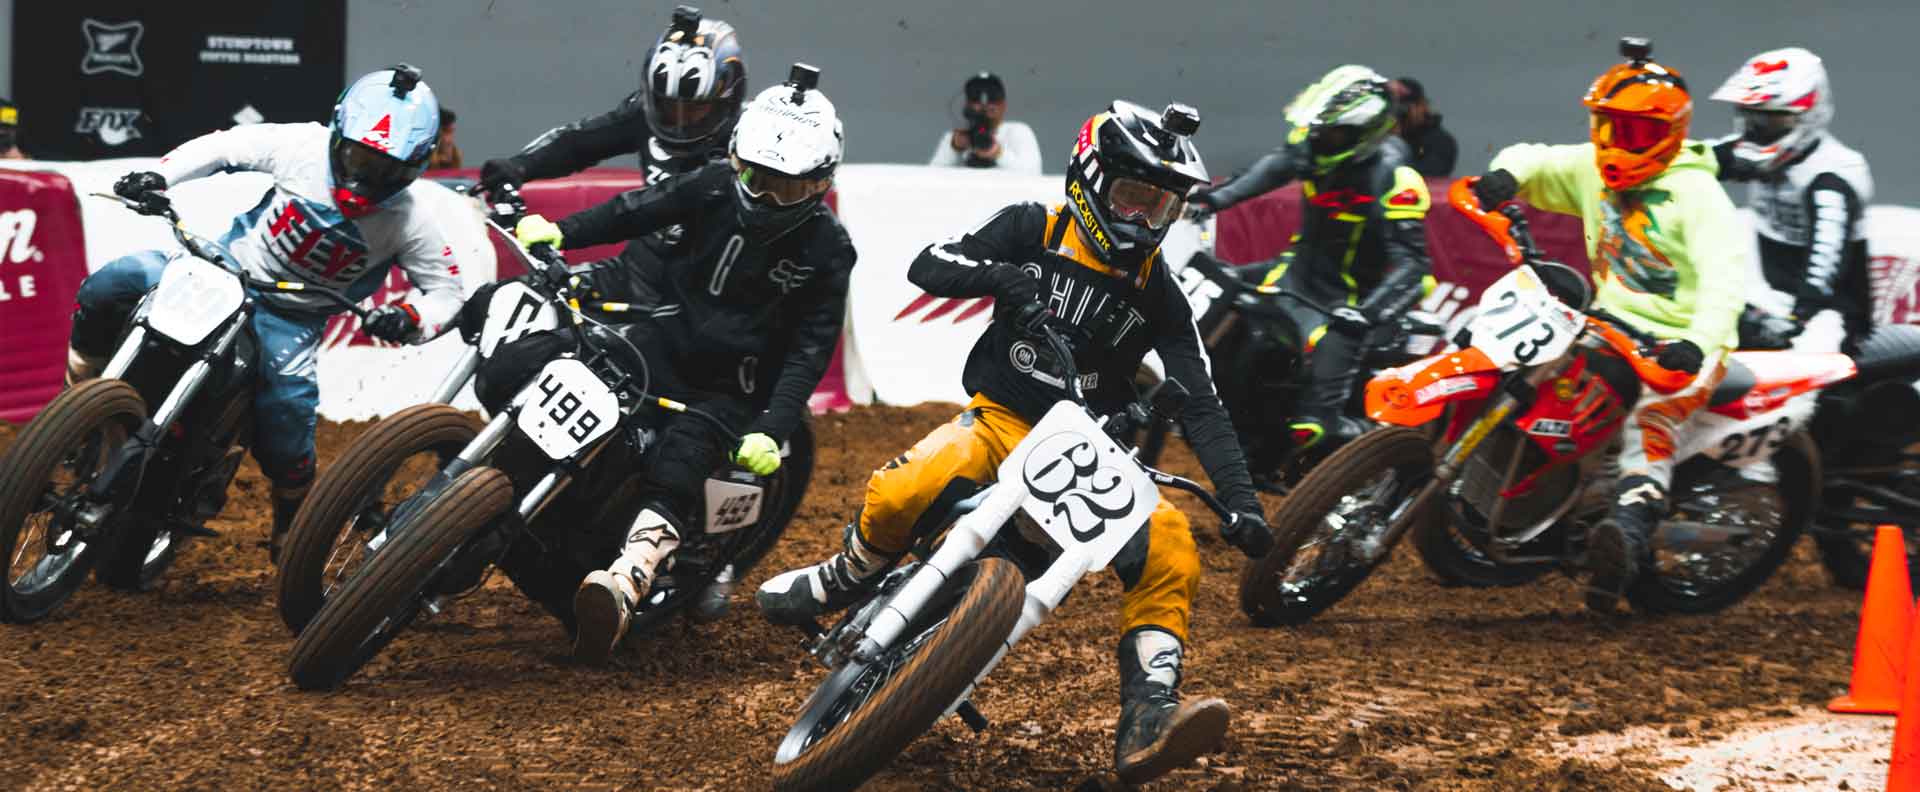 Andy ripping in the Electric Nationals flat track motorcycle race division